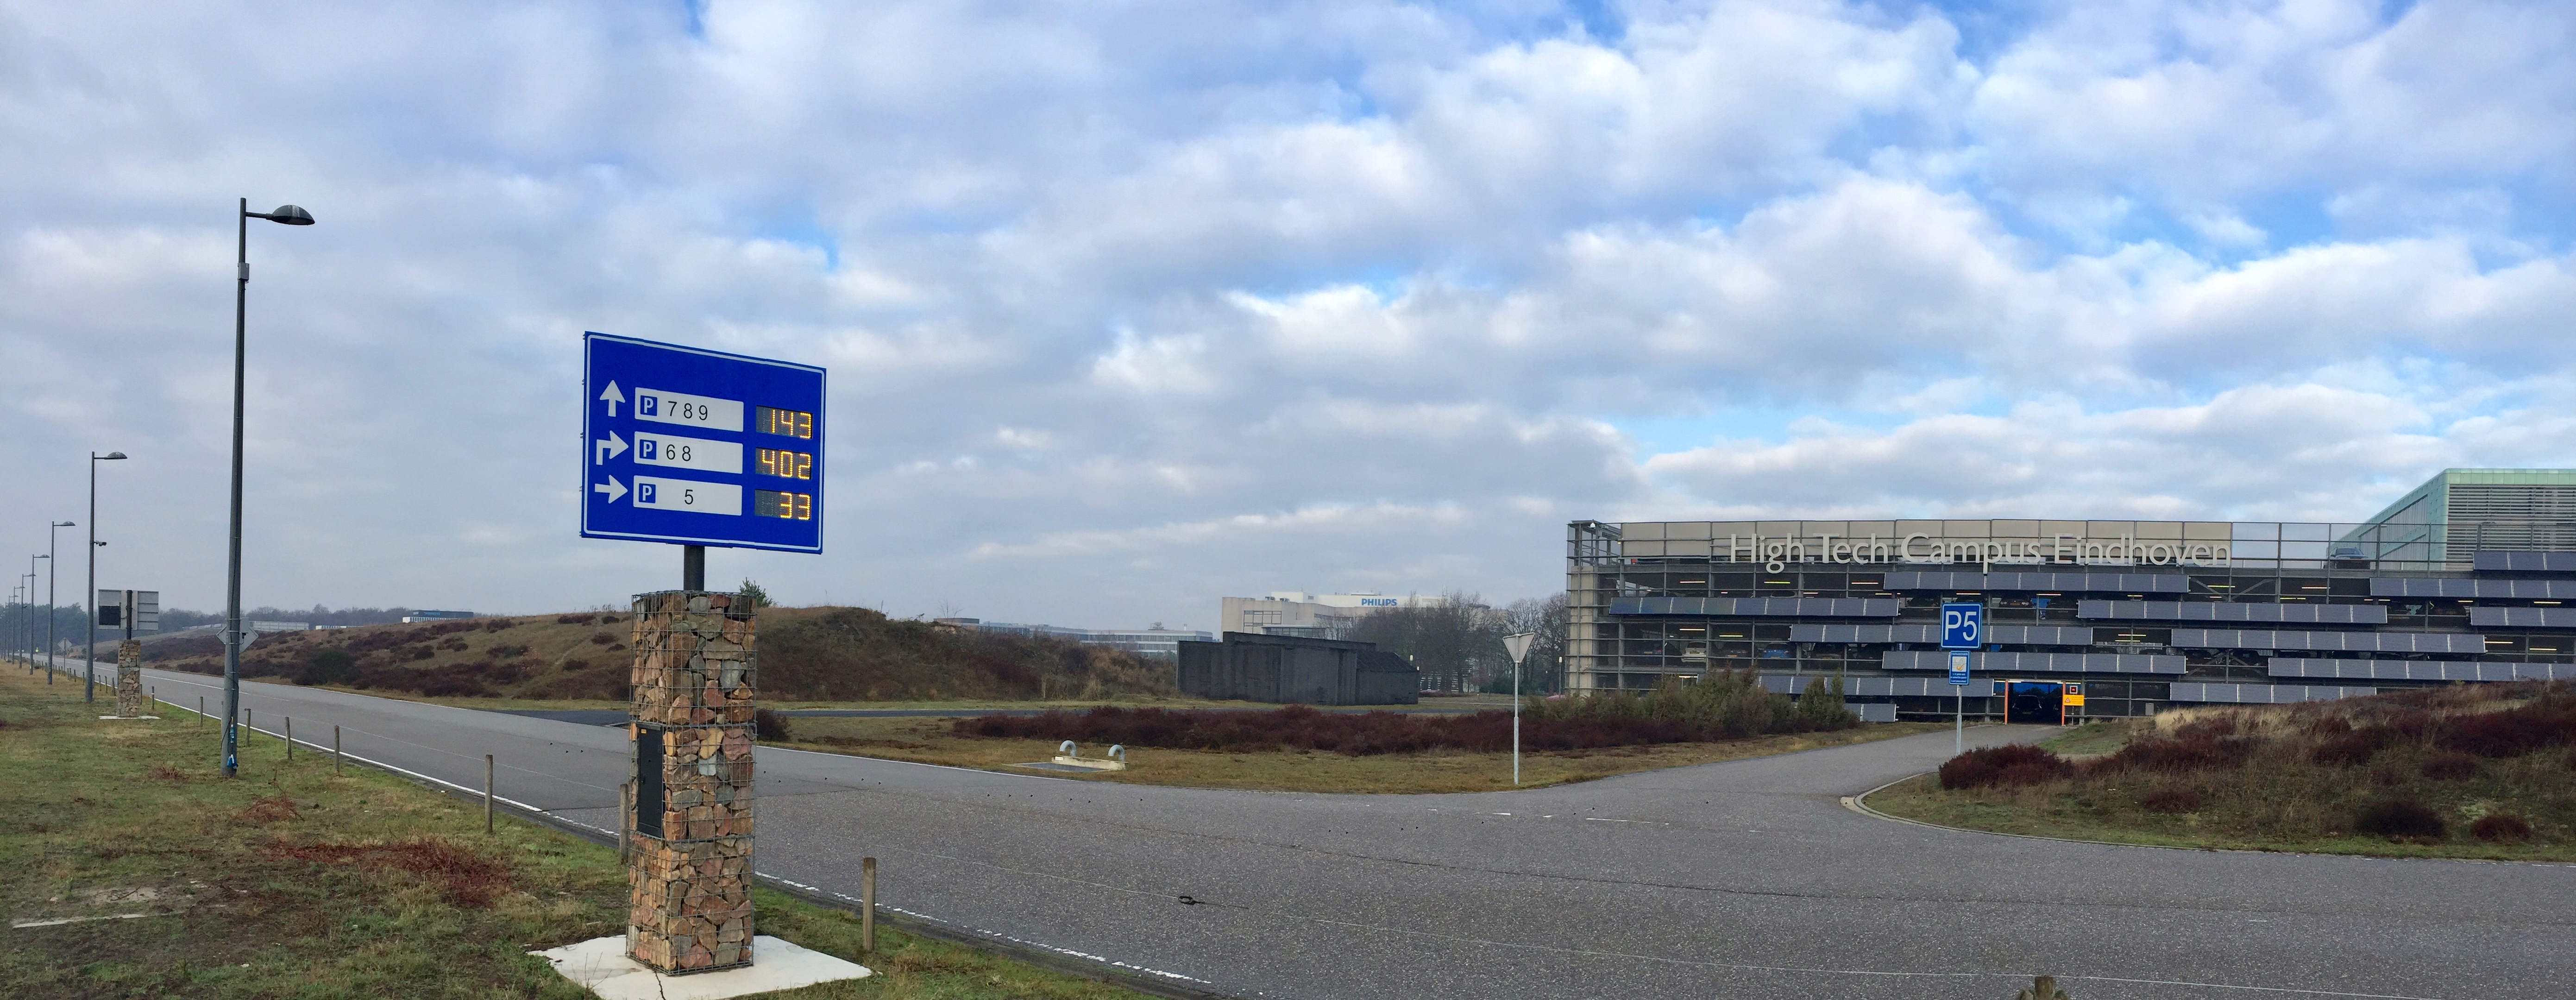 WPS Parking Systems at Eindhoven High Tech Campus 